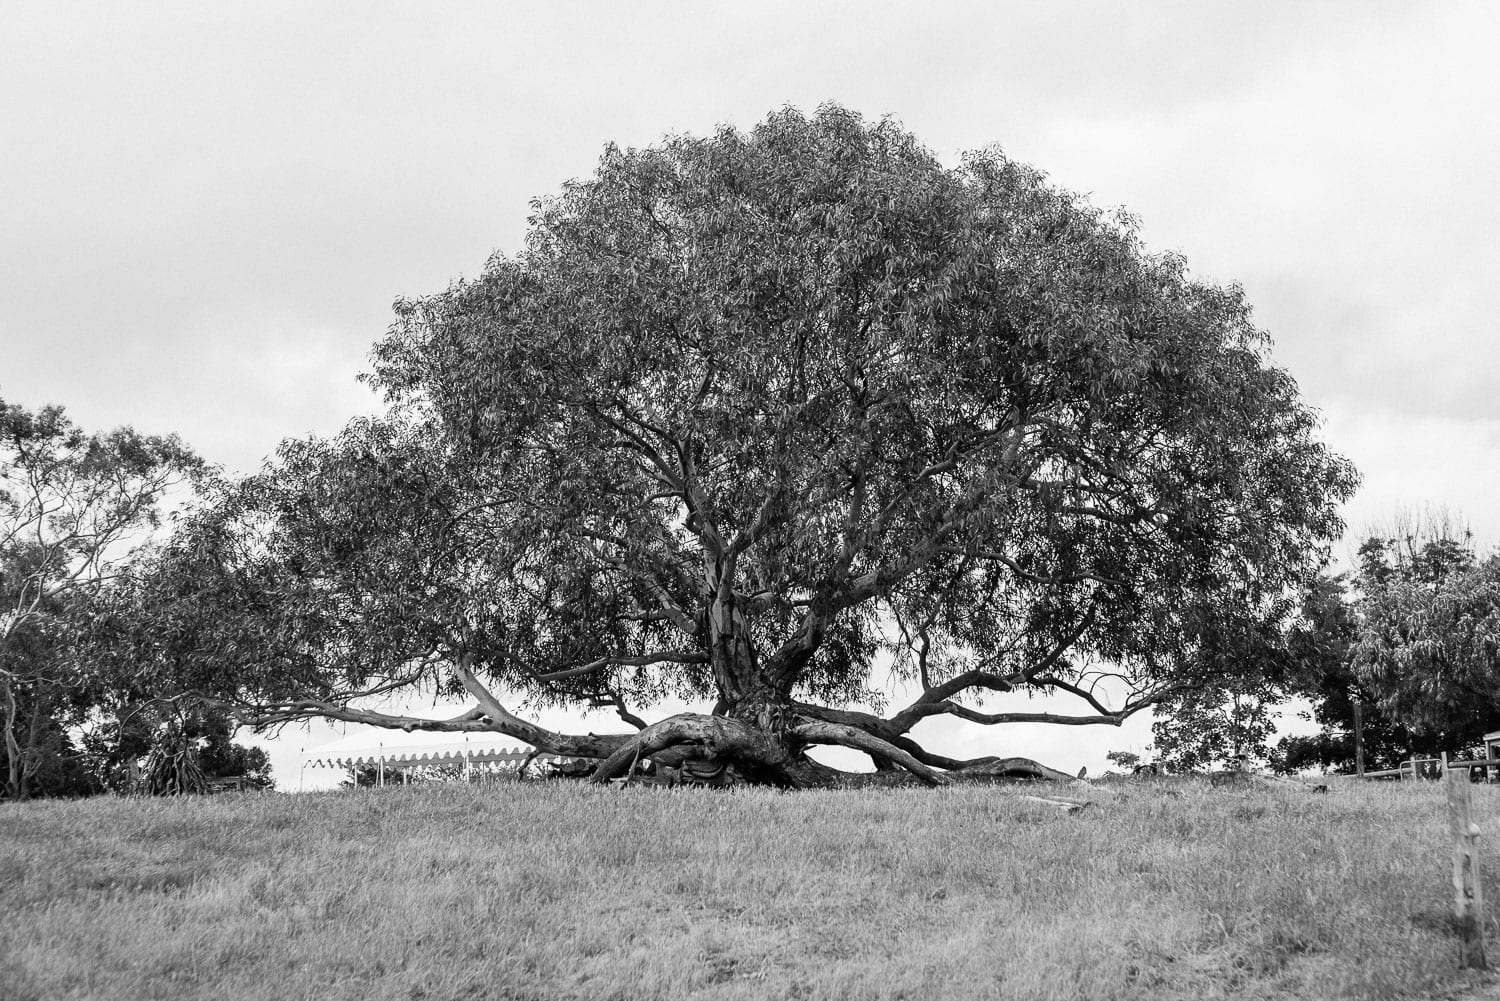 Giant tree at Tarndwarcoort in the Western District